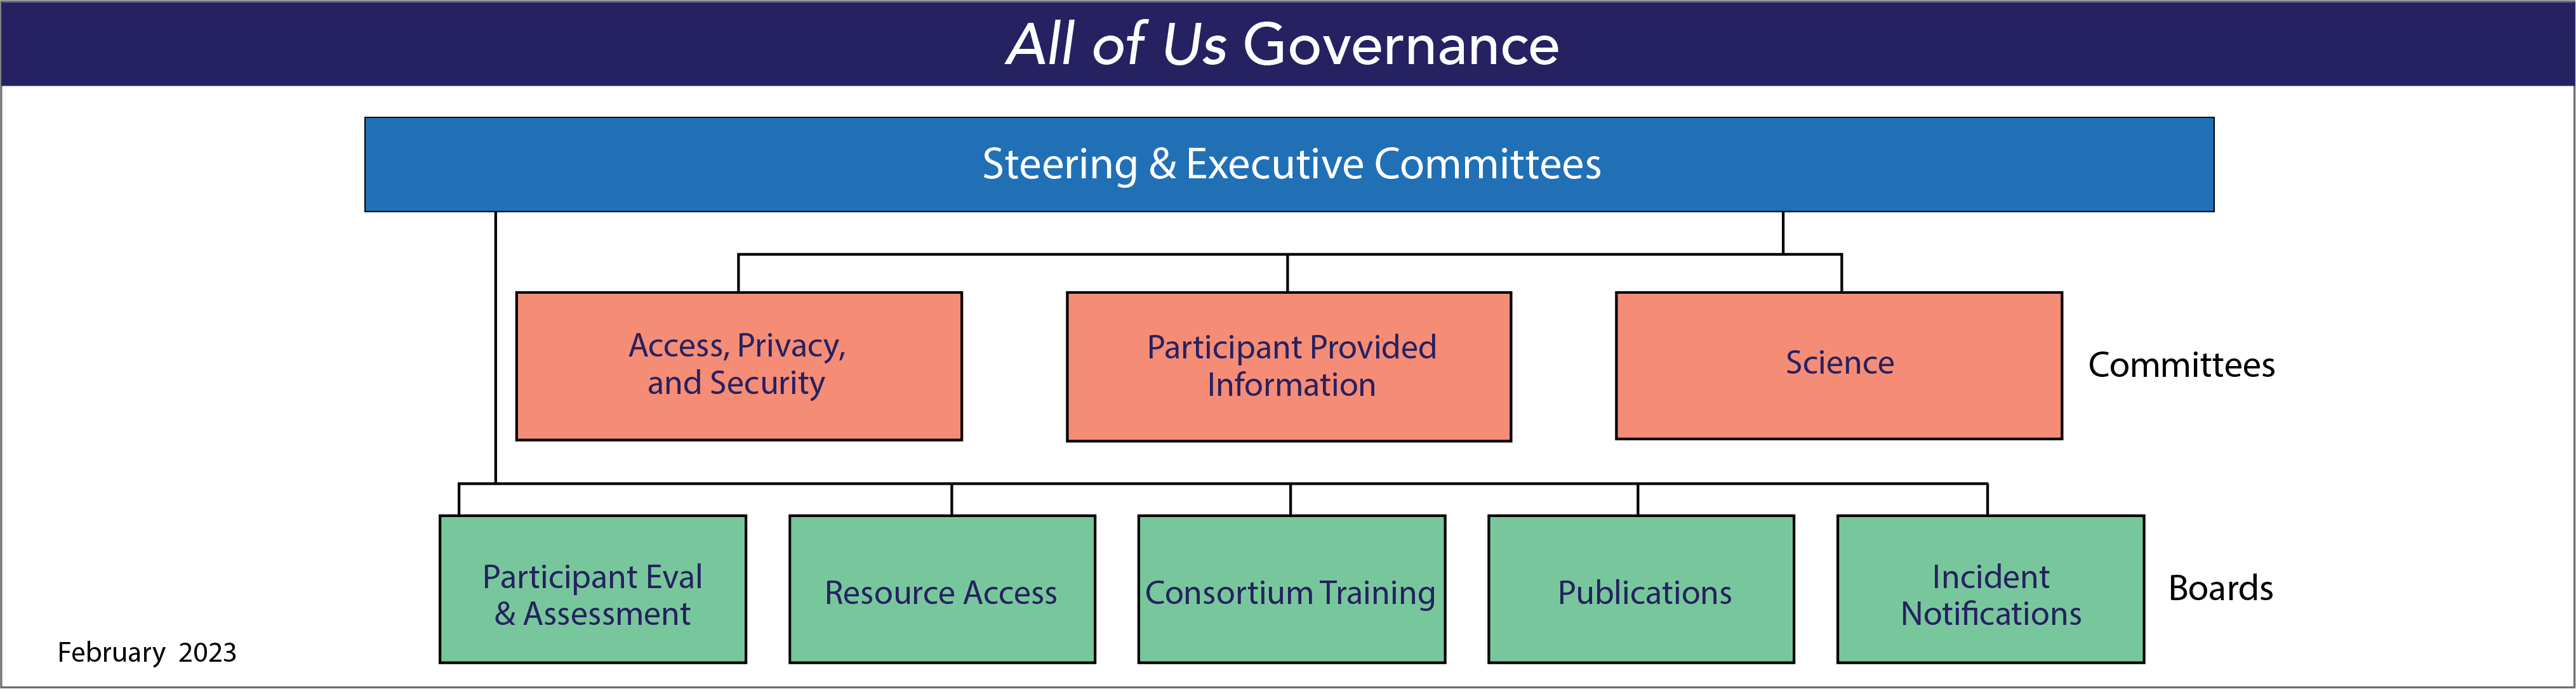 An organizational chart of the governance structure of the All of Us Research Program. All committees and board report to the Steering and Executive Committees. The org chart displays three committees on the first tier below the Steering and Executive Committees: Access, Privacy, and Security; Participant Provided Information; and Science. On the next tier down are five boards: Participant Evaluation and Assessment, Resource Access, Consortium Training, Publications, and Incident Notifications.